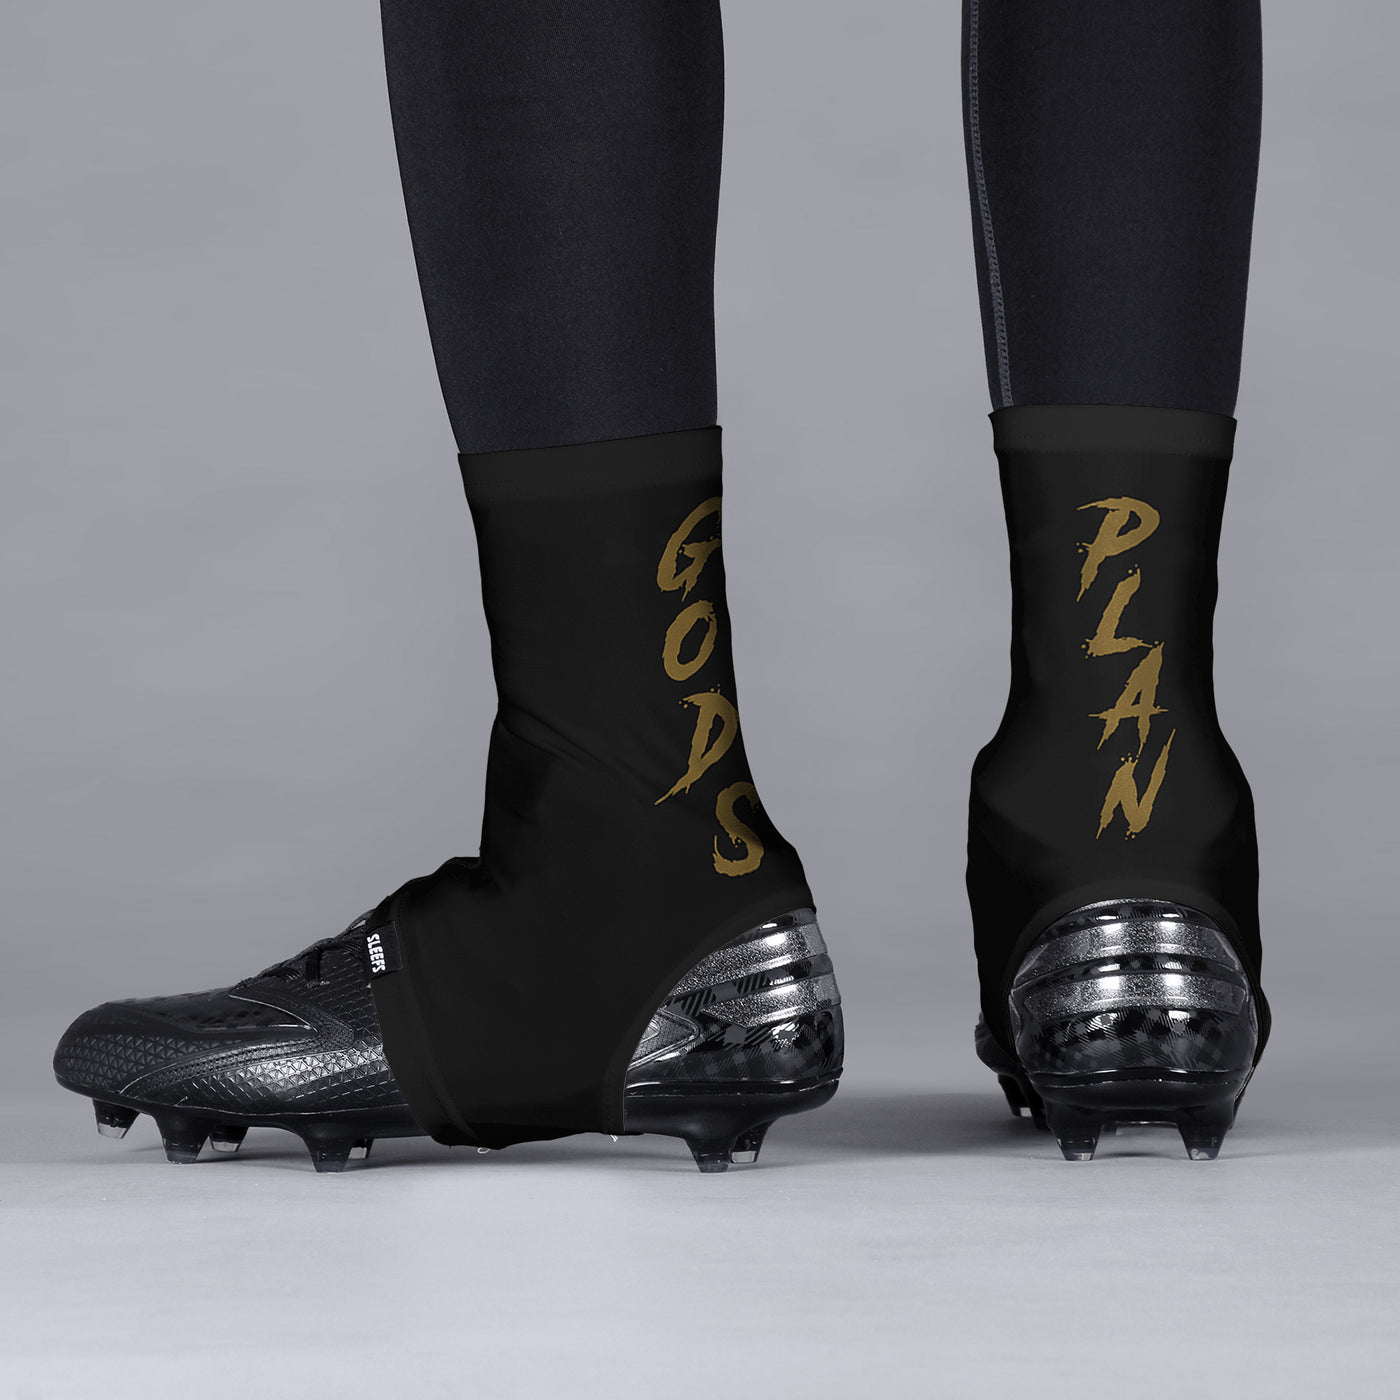 God's Plan Black Gold Spats / Cleat Covers